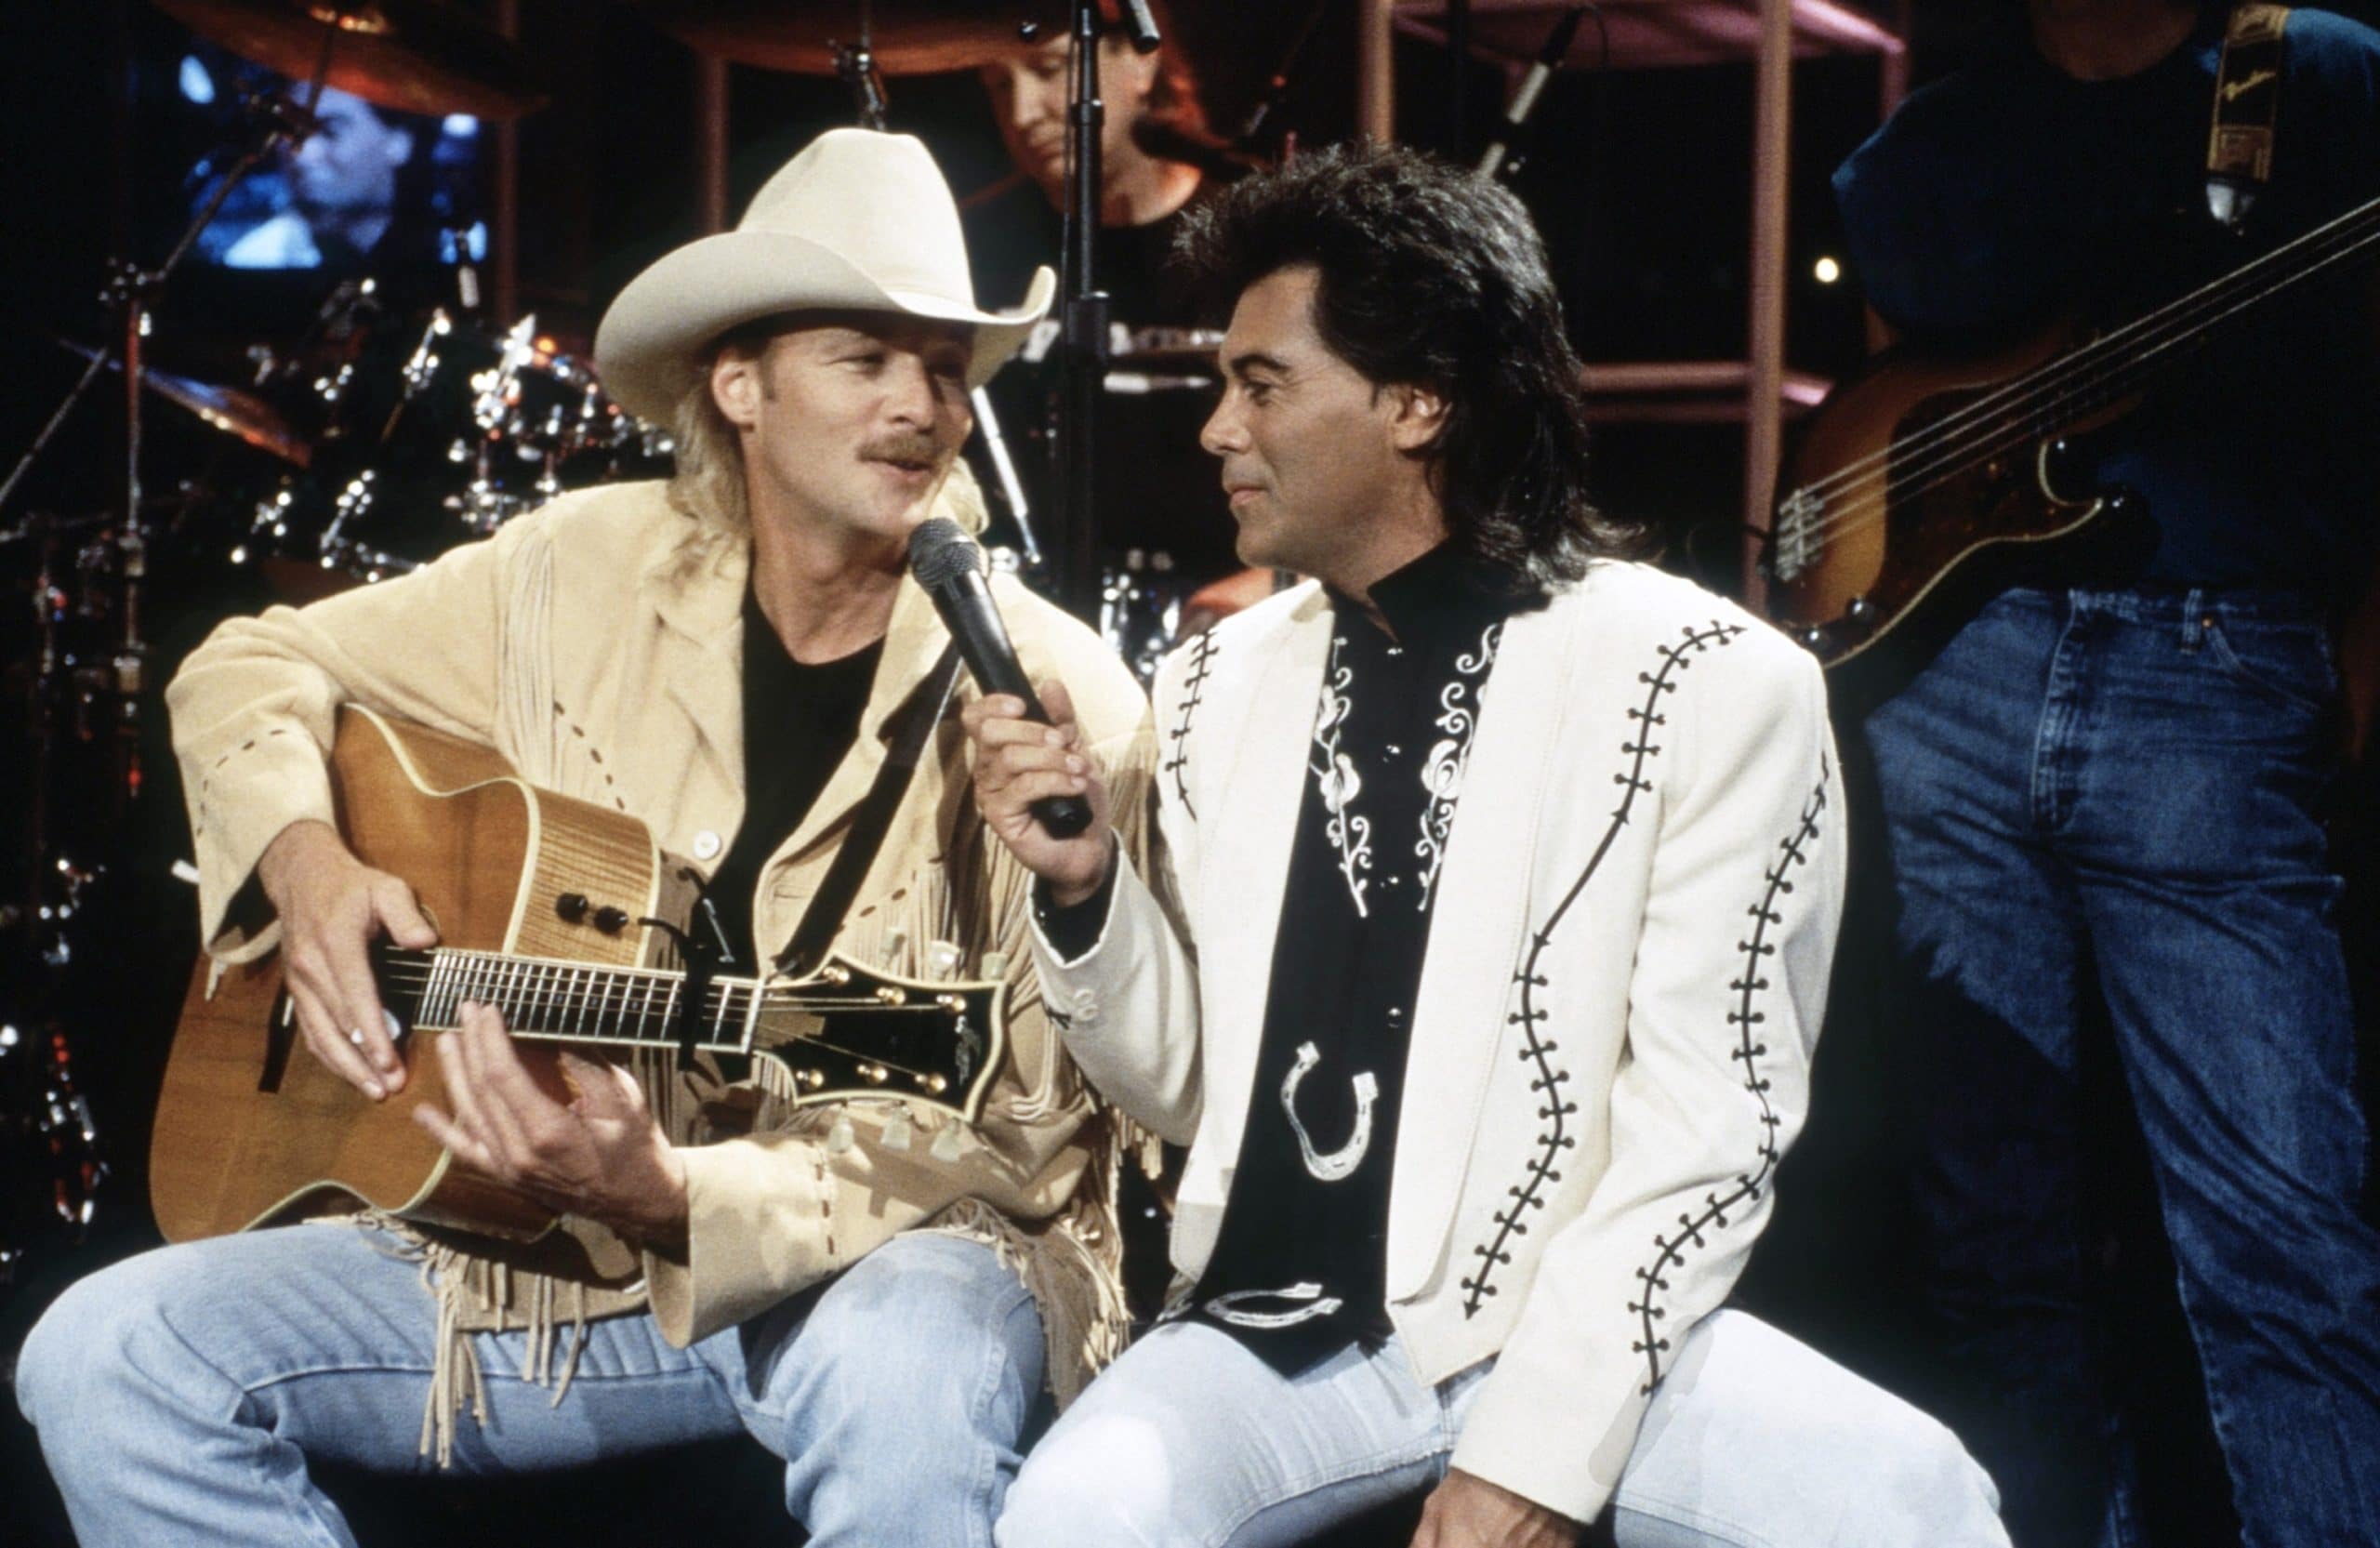 THE MARTY PARTY, from left: Alan Jackson, Marty Stuart), (aired November 29, 1995)